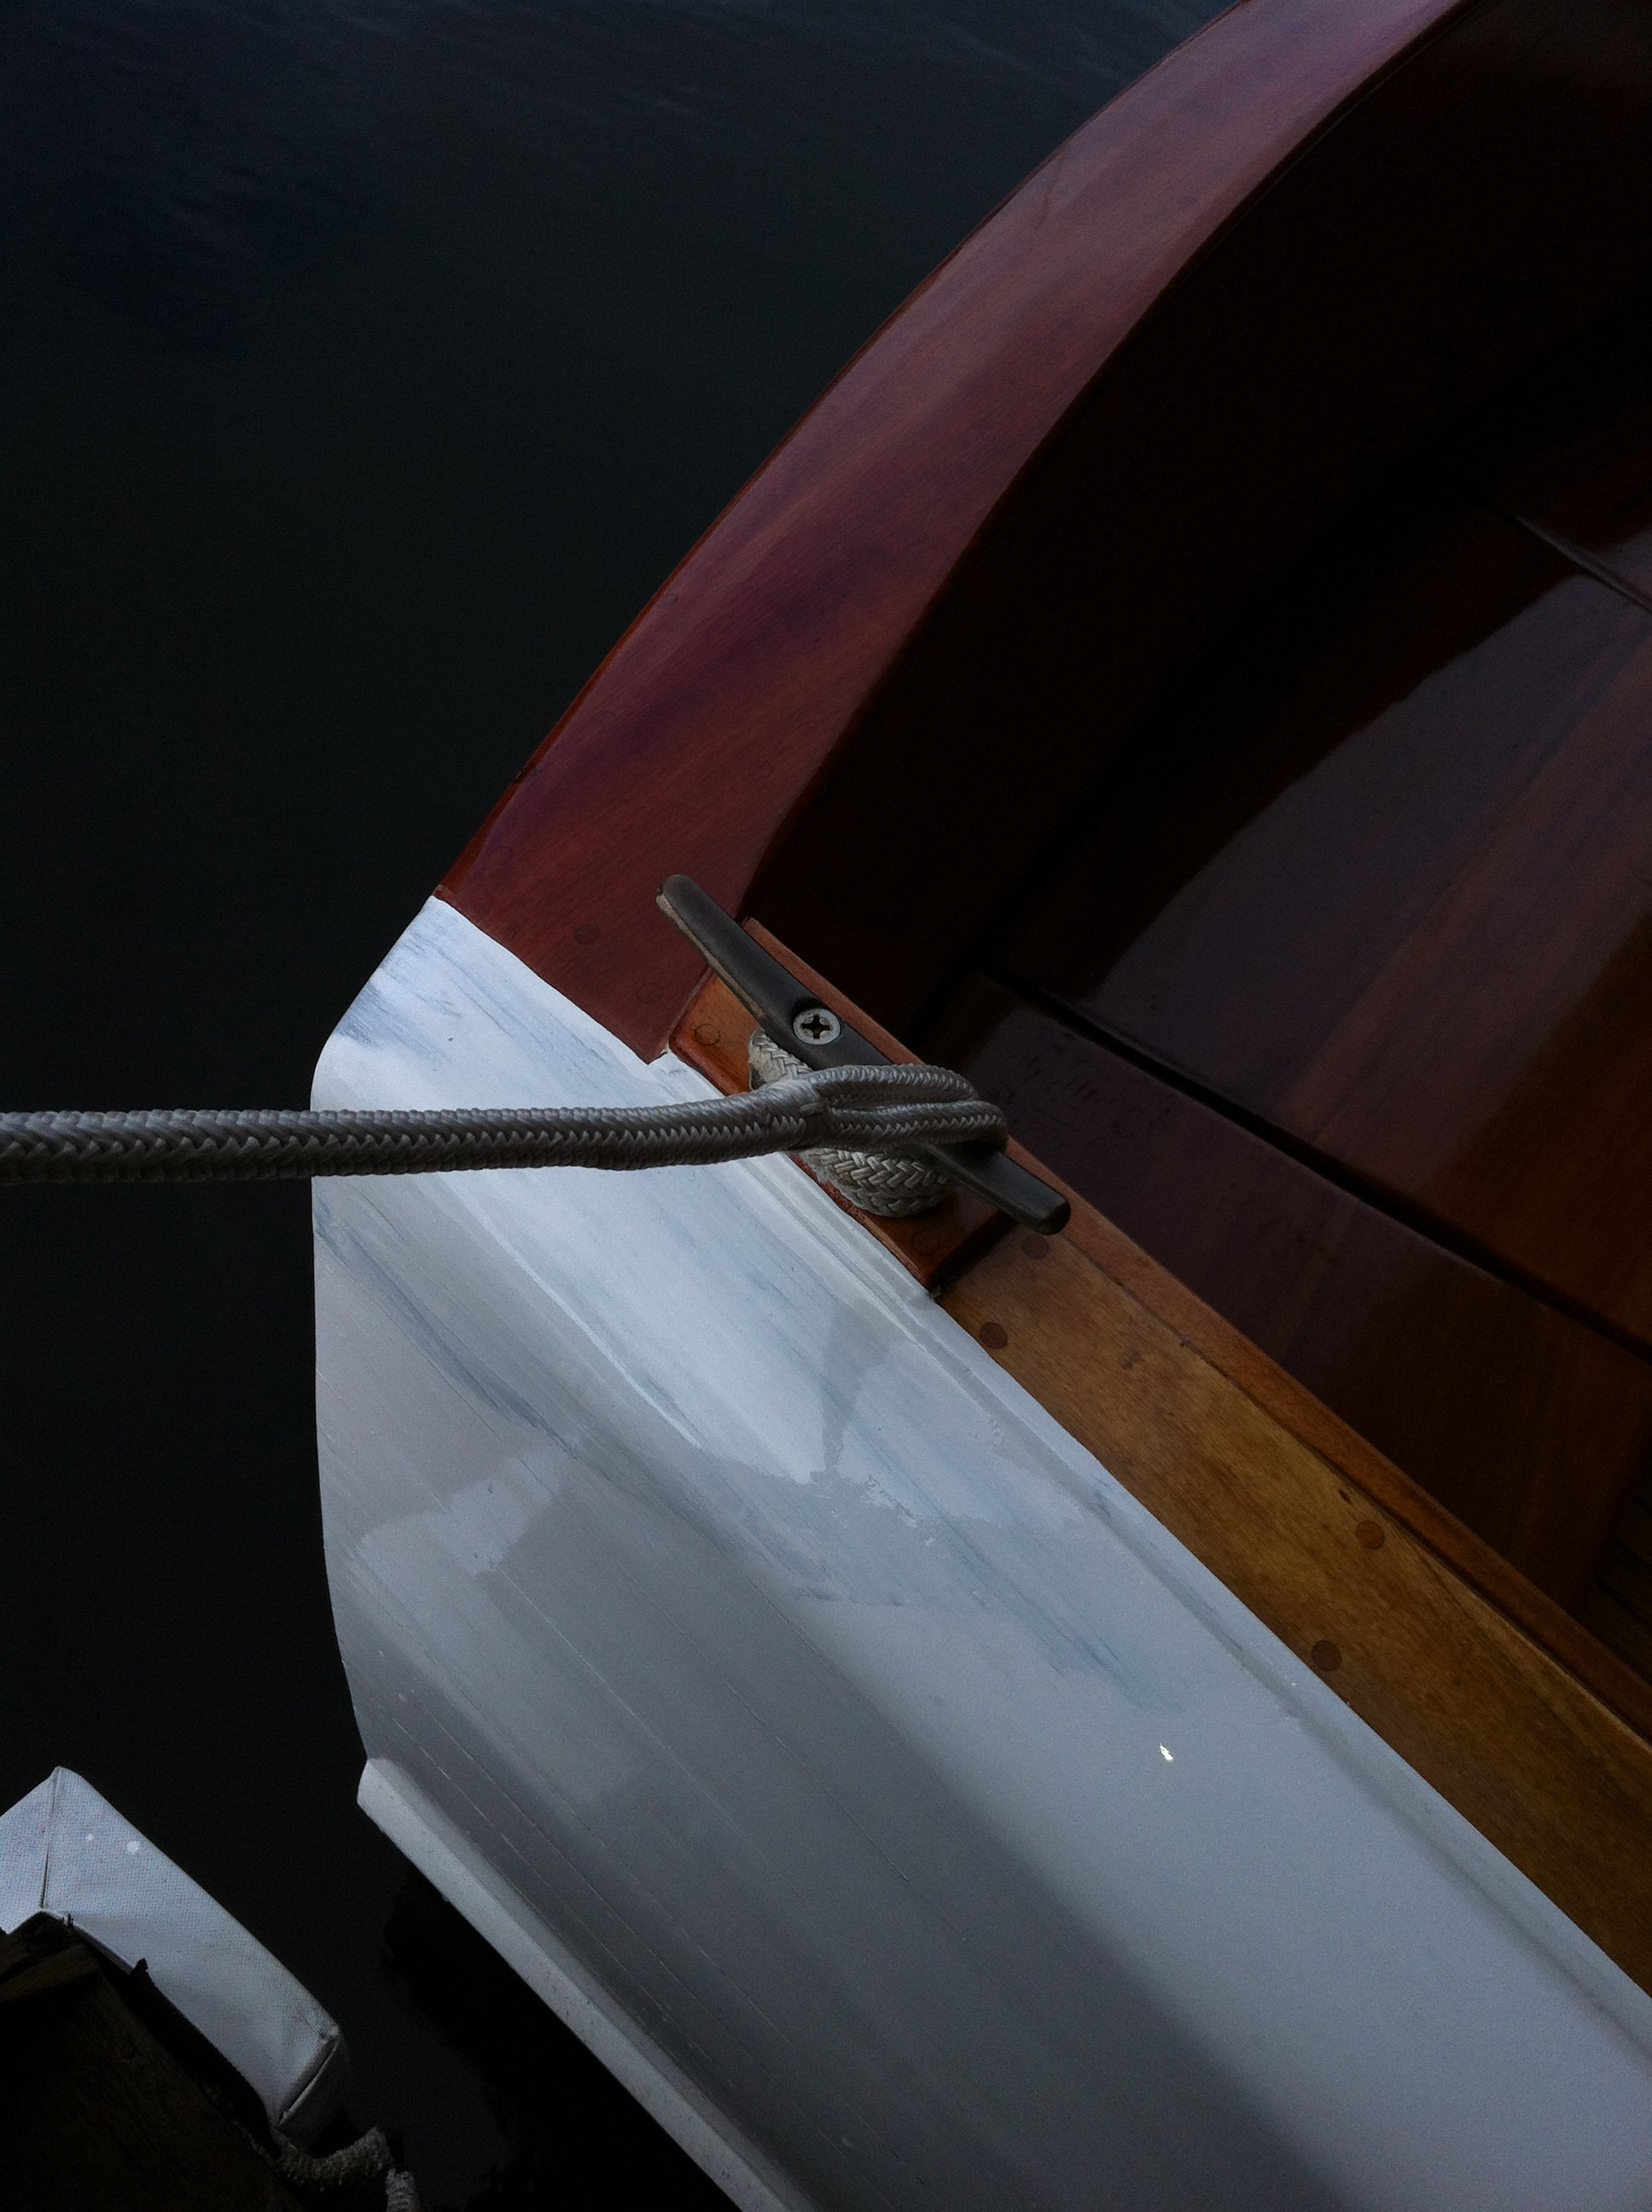 I do some touch-up on the aft gunwales where I had faired the new transom cap wood into the rounded gunwales.